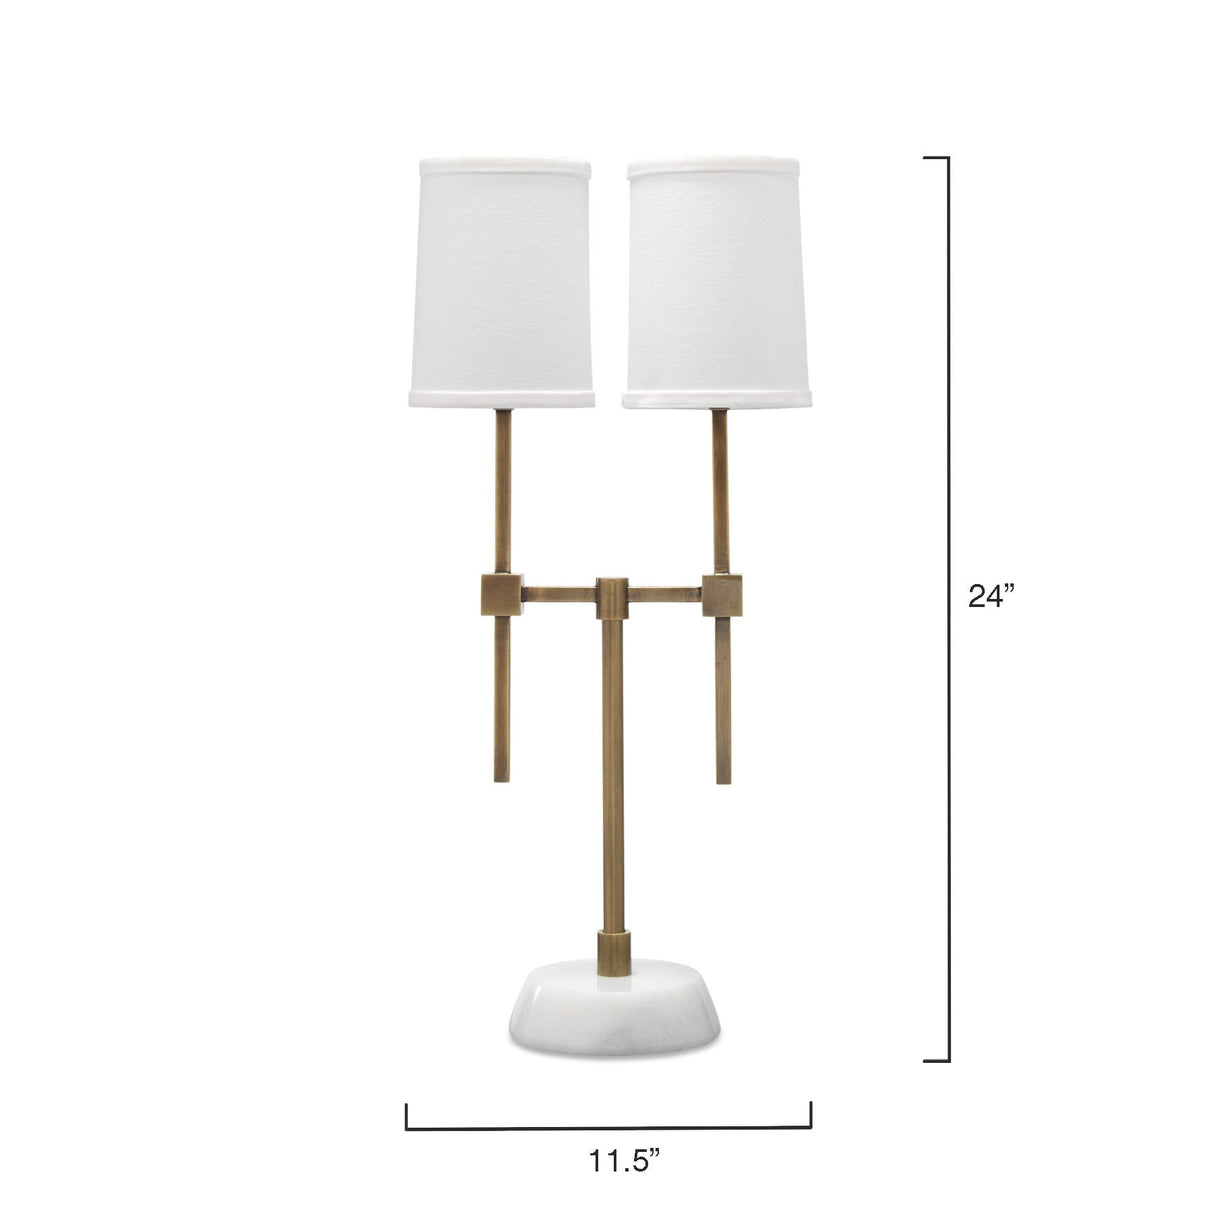 Jamie Young Co. Minerva Minerva Twin Shade Console Lamp Lighting jamie-young-9MINE-TLAB